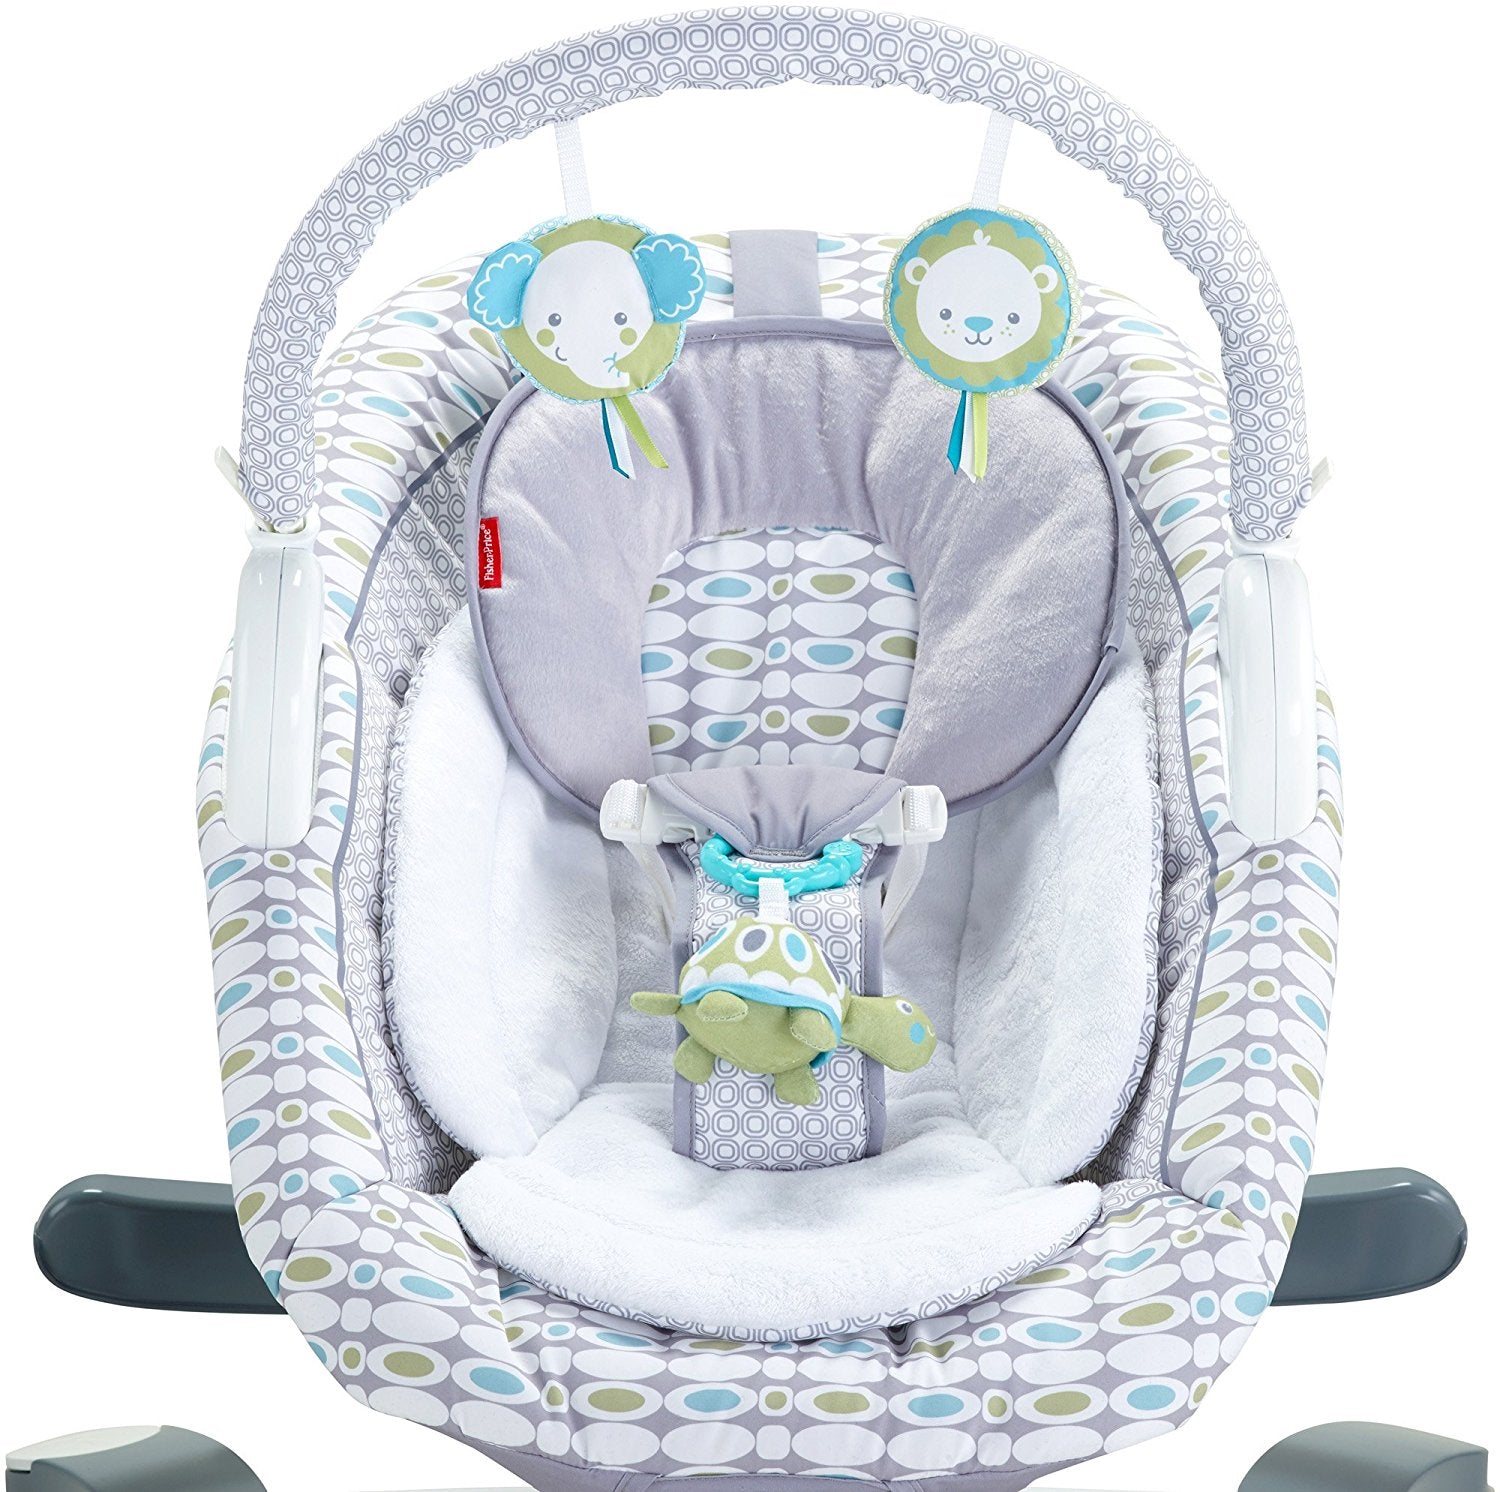 fisher price rock and glide 4 in 1